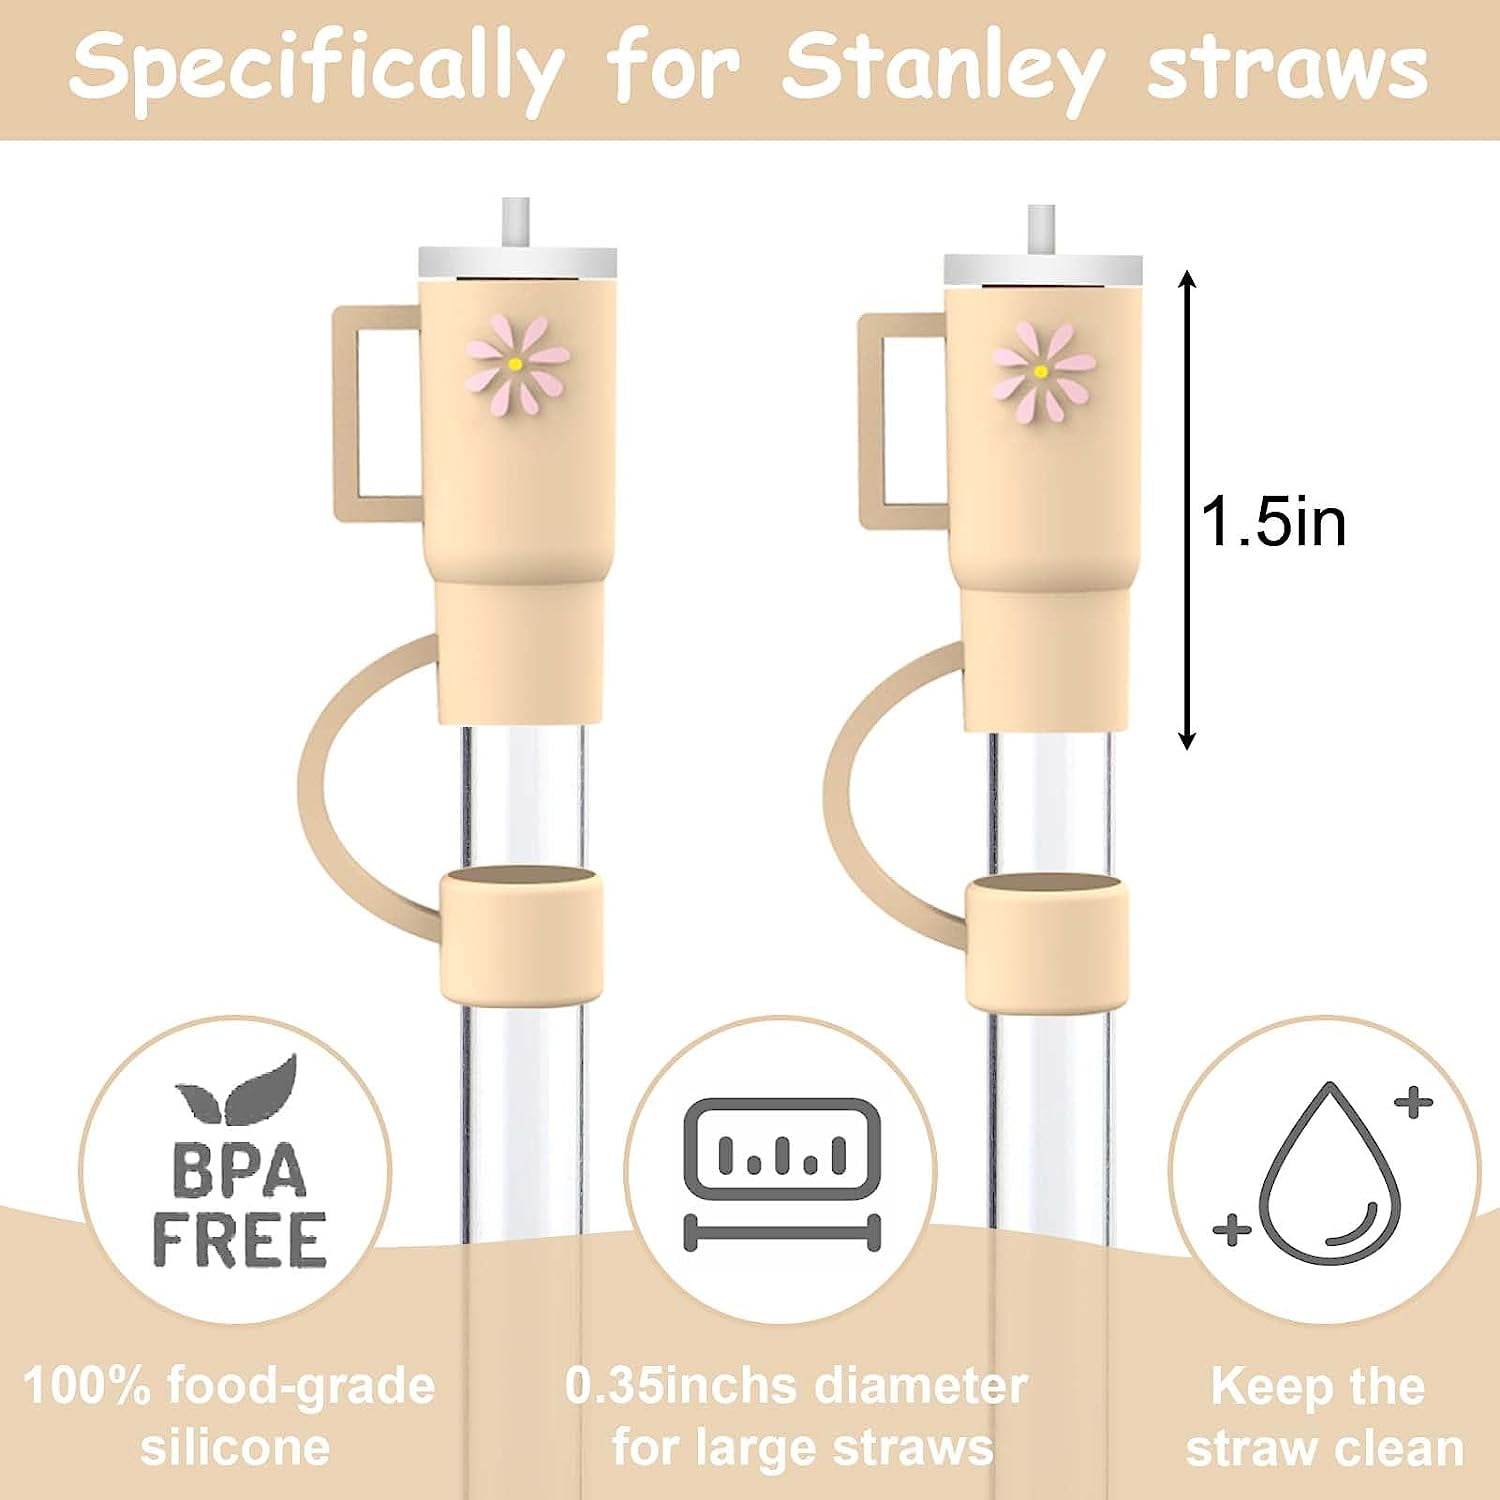  12 Pcs Christmas Straw Covers Cap for Stanley Cup 40 oz 30 oz  Tumbler with Handle, 9-10mm Reusable Straw Topper, Stanley Accessories Straw  Tip Covers for Kids Party Favor: Home & Kitchen